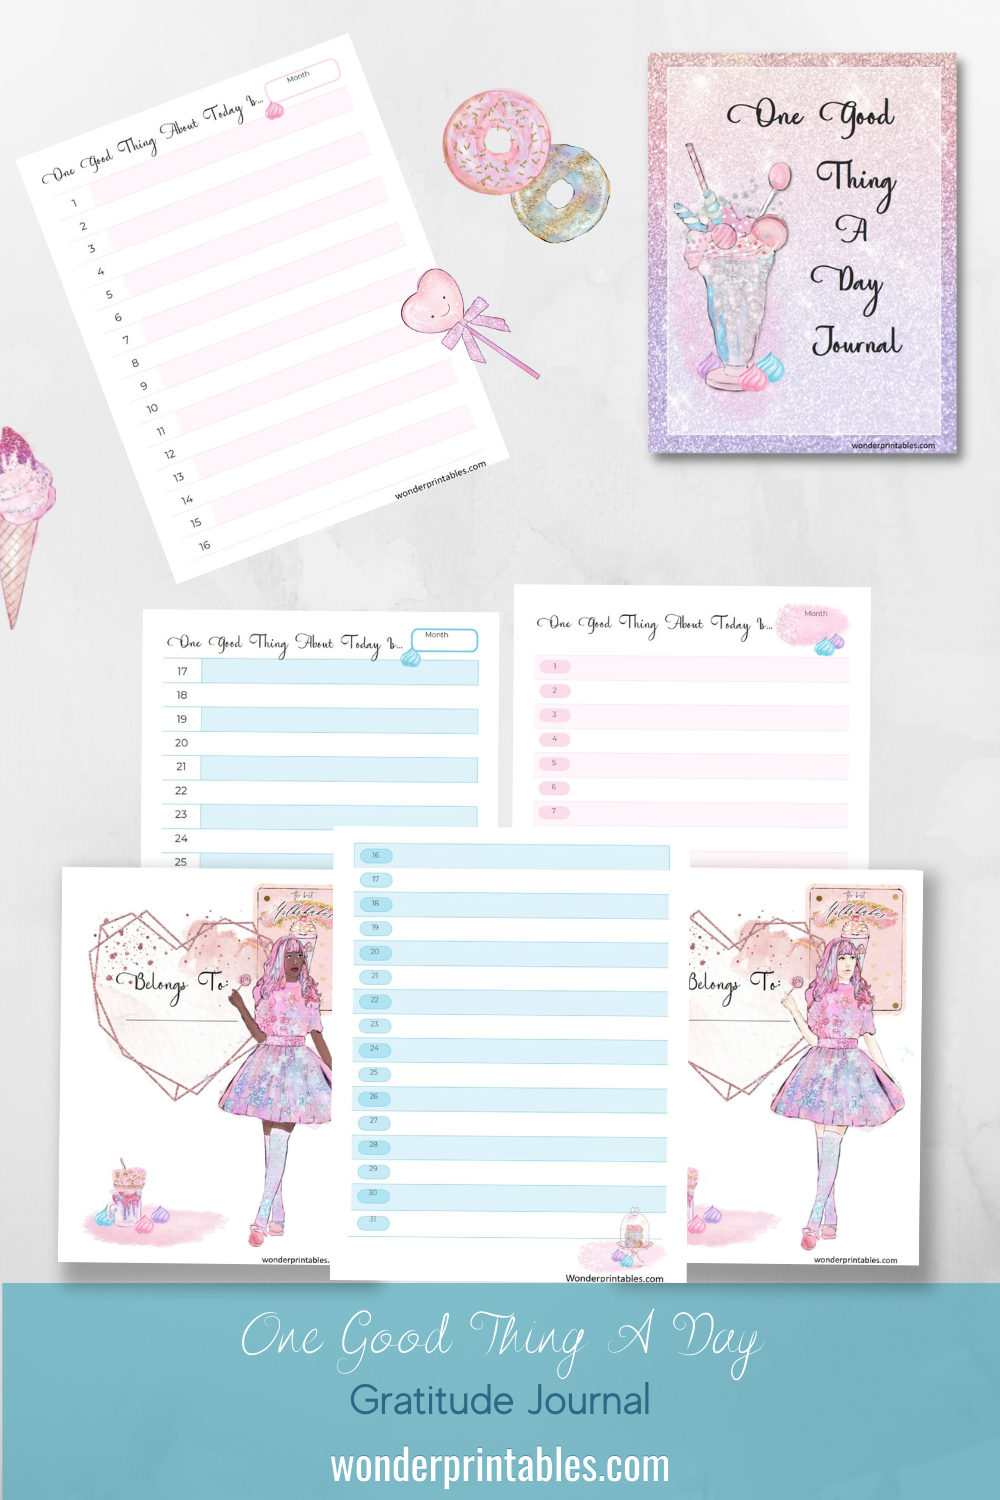 Gratitude Journal - One Good Thing A Day Journal - Printable